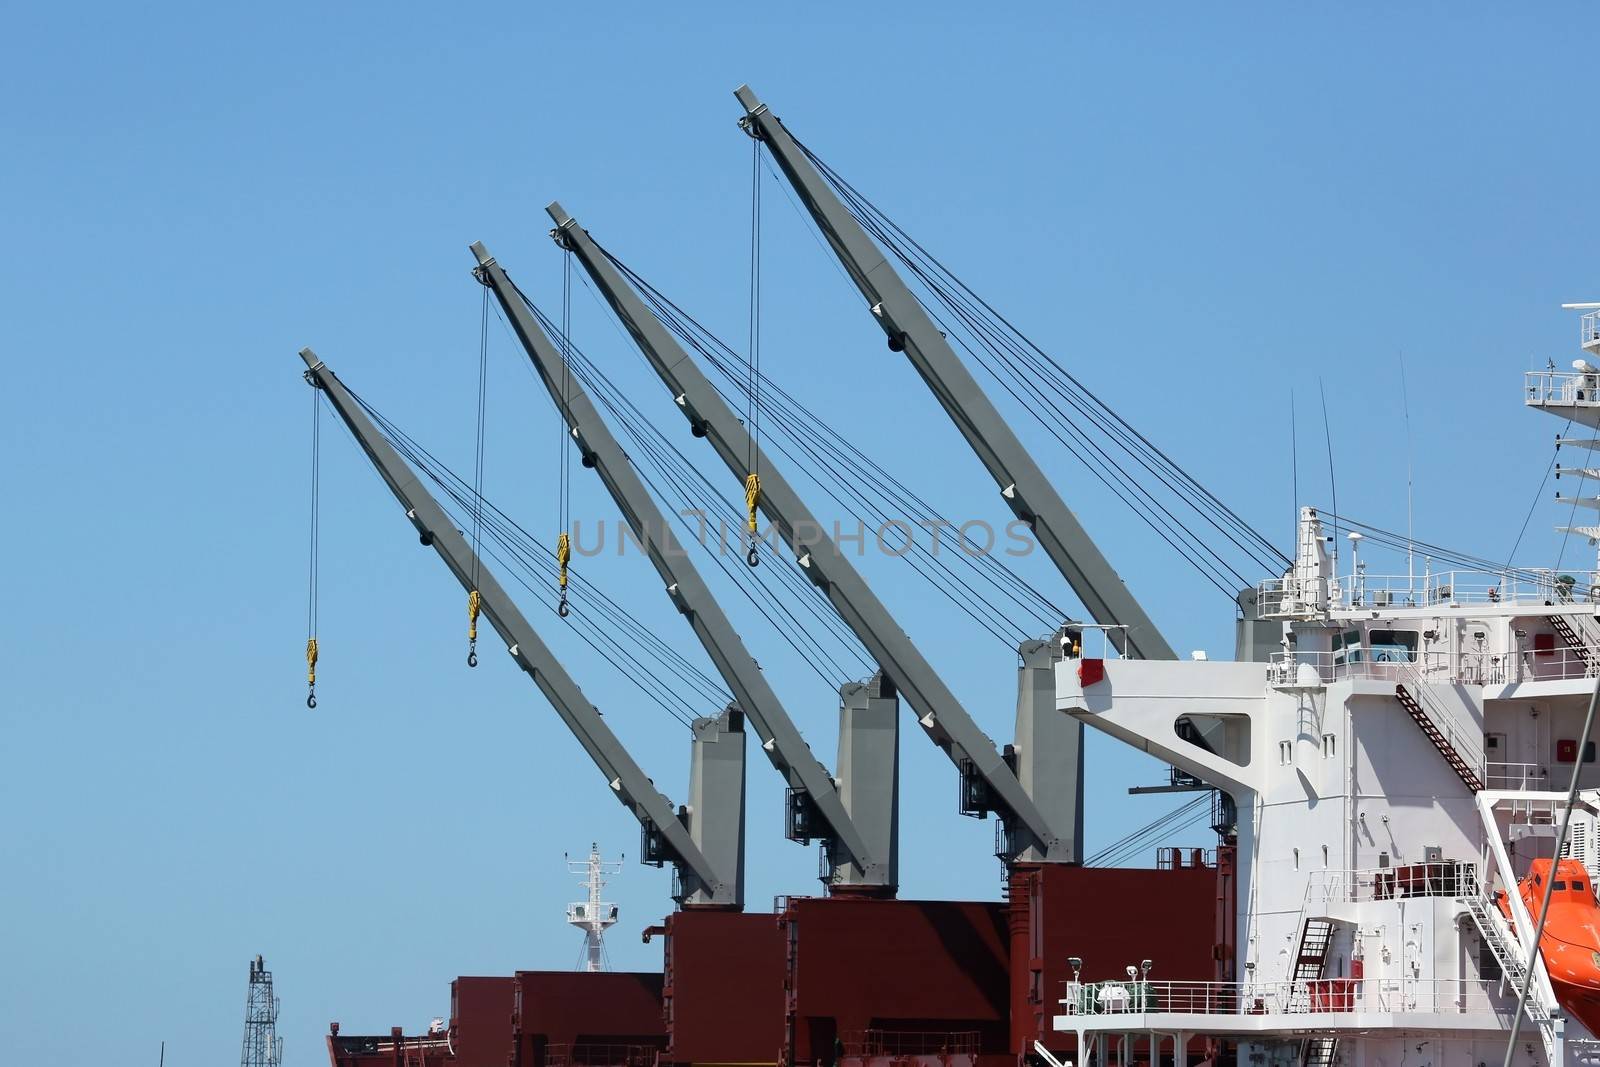 Four large cranes on board a cargo ship